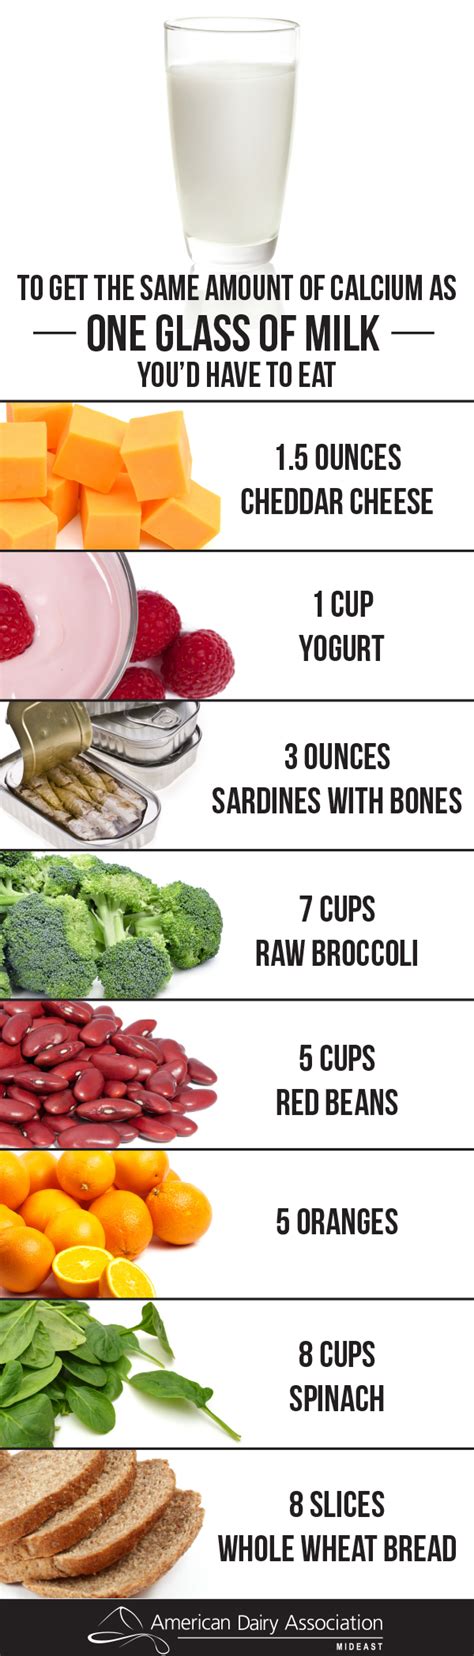 Eat fresh veggies and fruits, whole grains, meat, fish, and dairy products, but avoid empty calories like in refined foods. The Ultimate Calcium Source - Arps Dairy